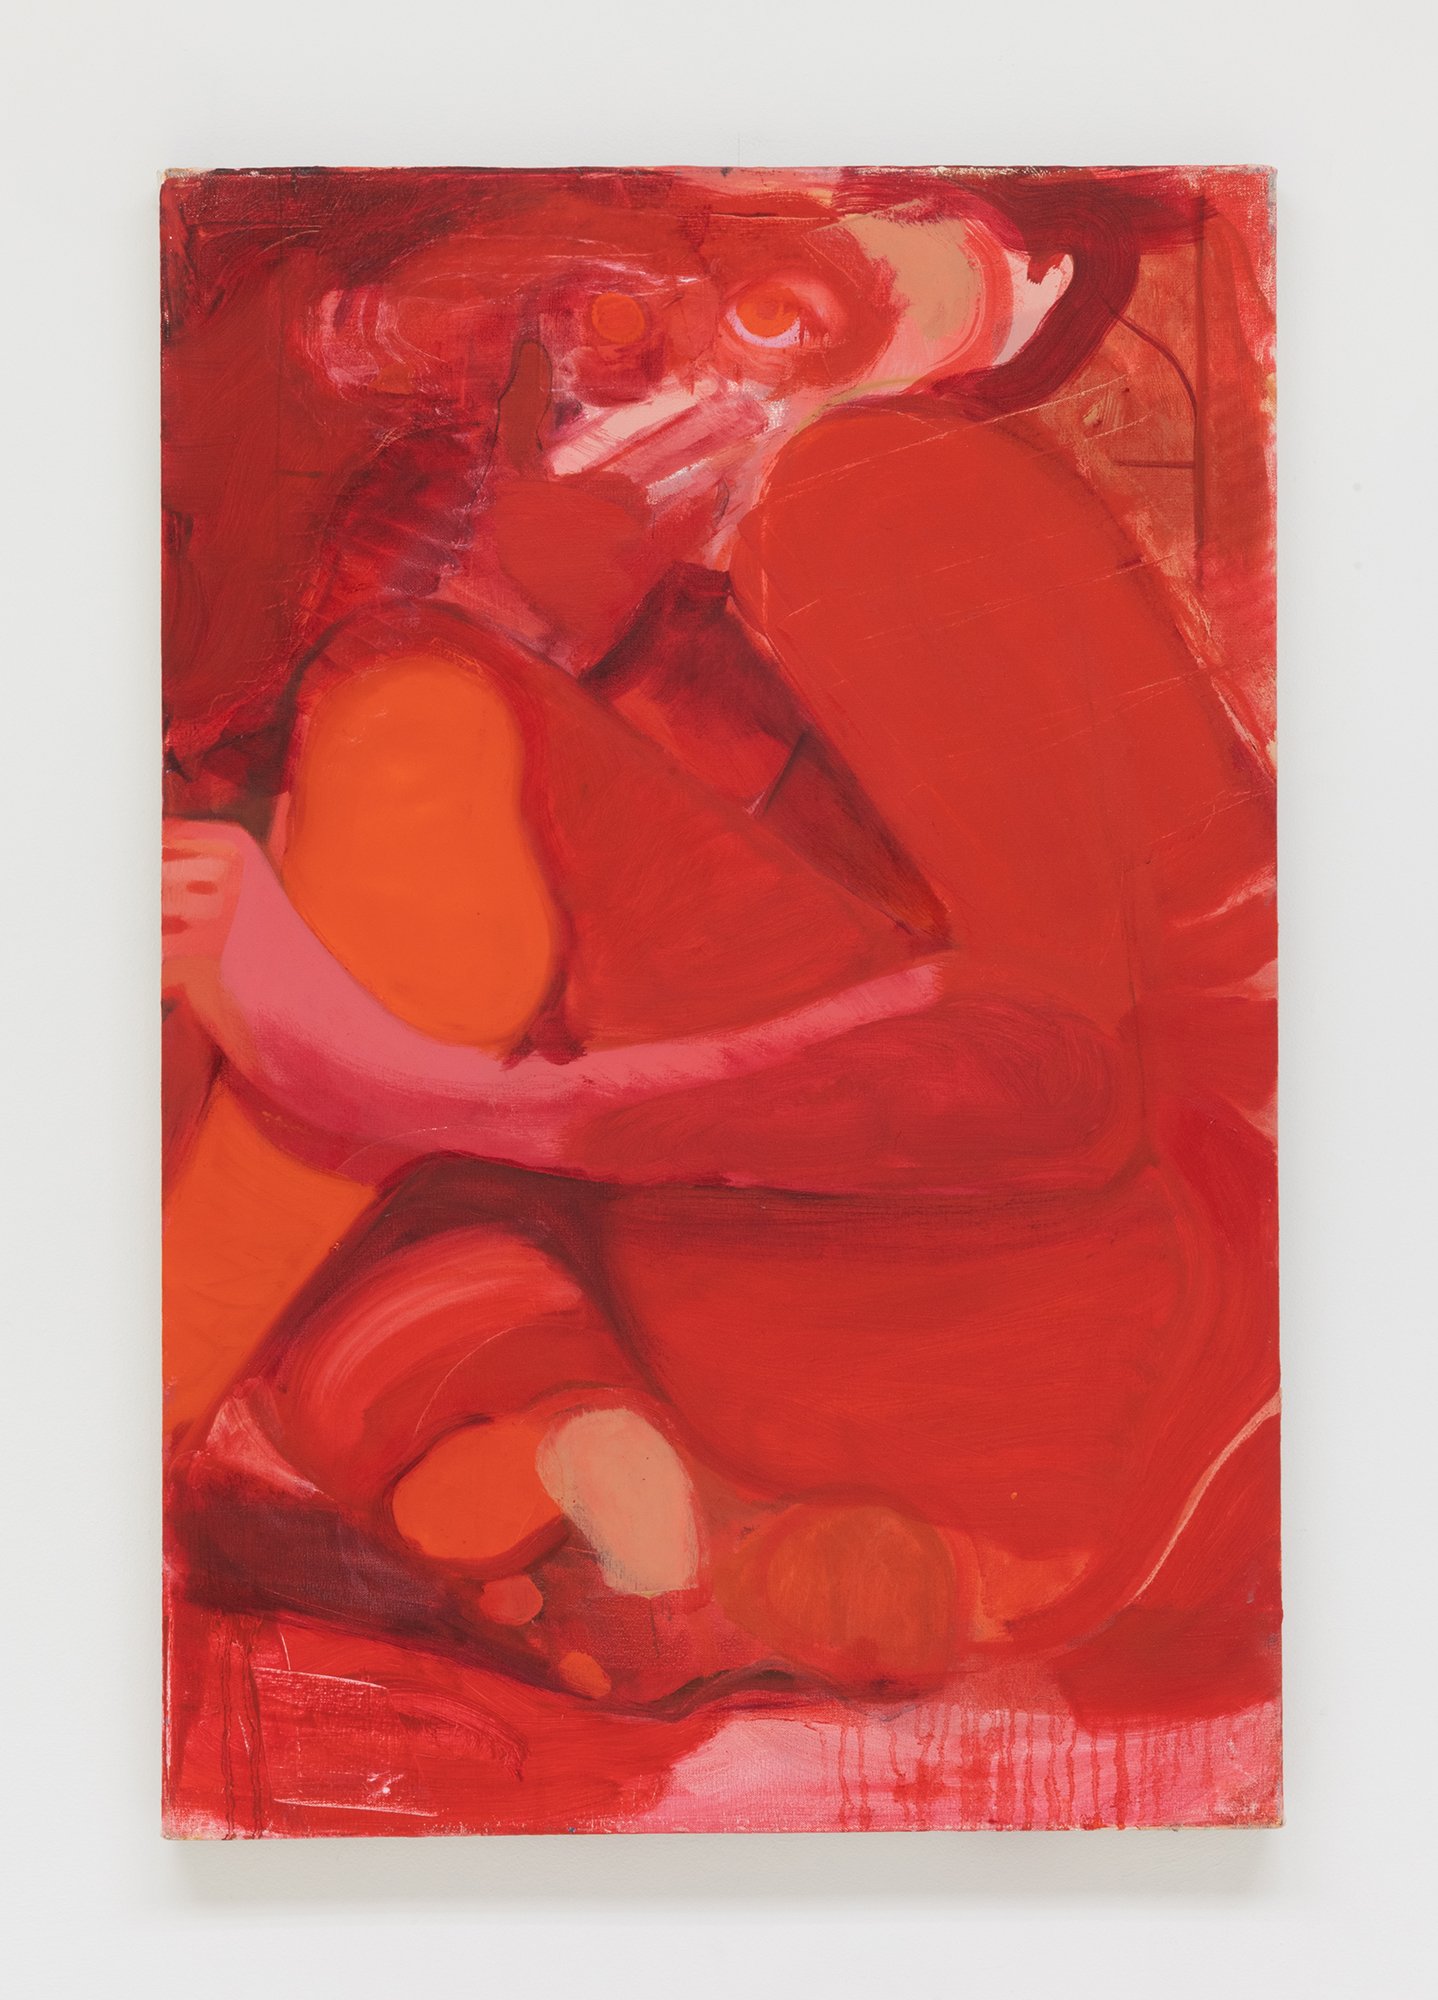  Stefan Hoza,  Laugher (red),  2021. Oil on canvas. 36 x 24 inches. 